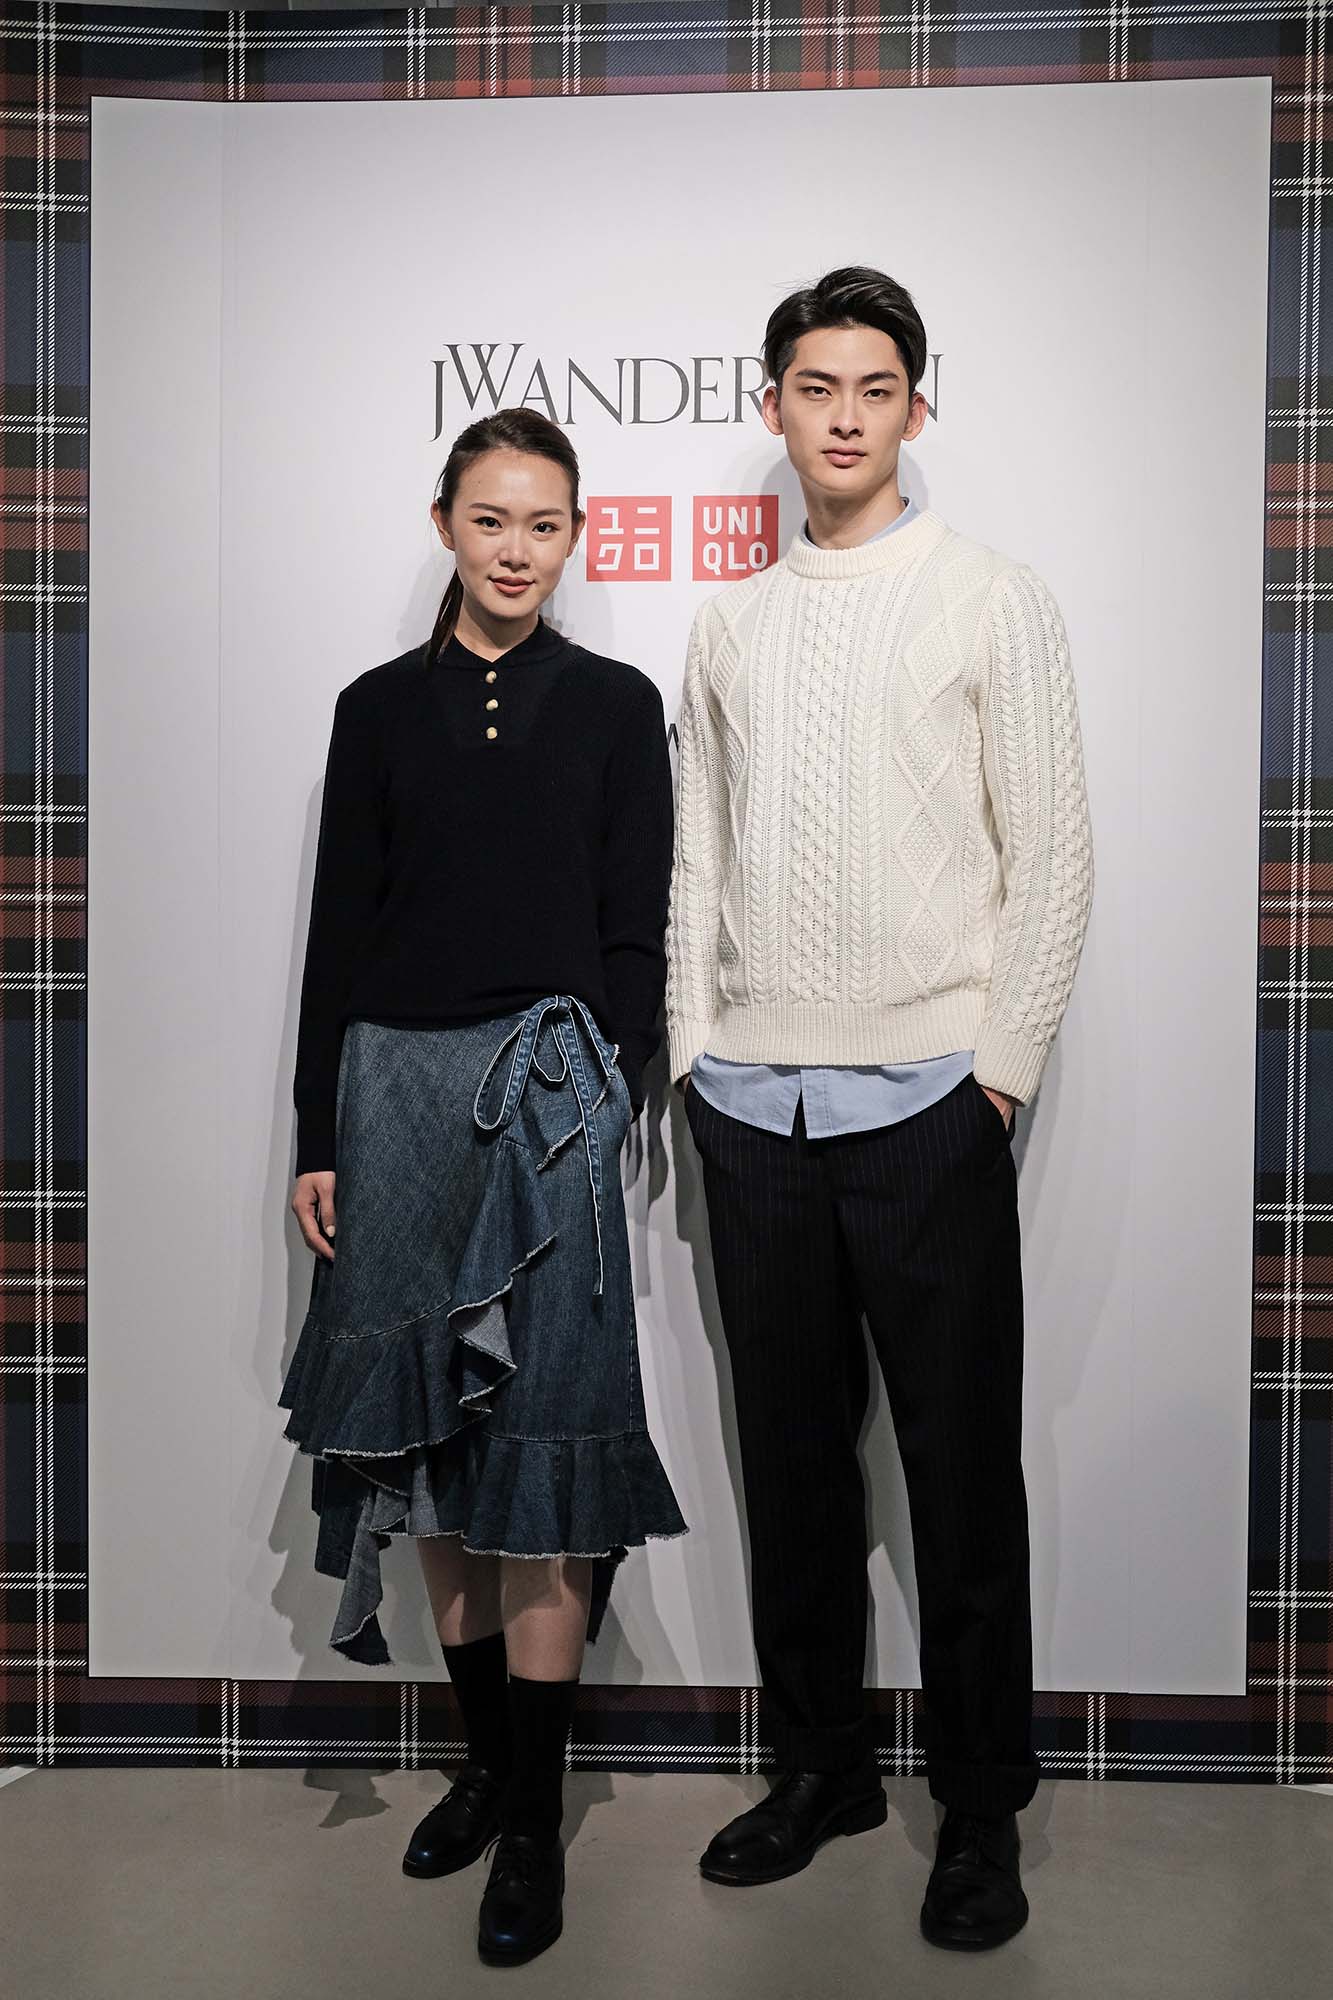 Uniqlo And Jw Anderson 17 Aw Collection Preview 15 Keedan Com